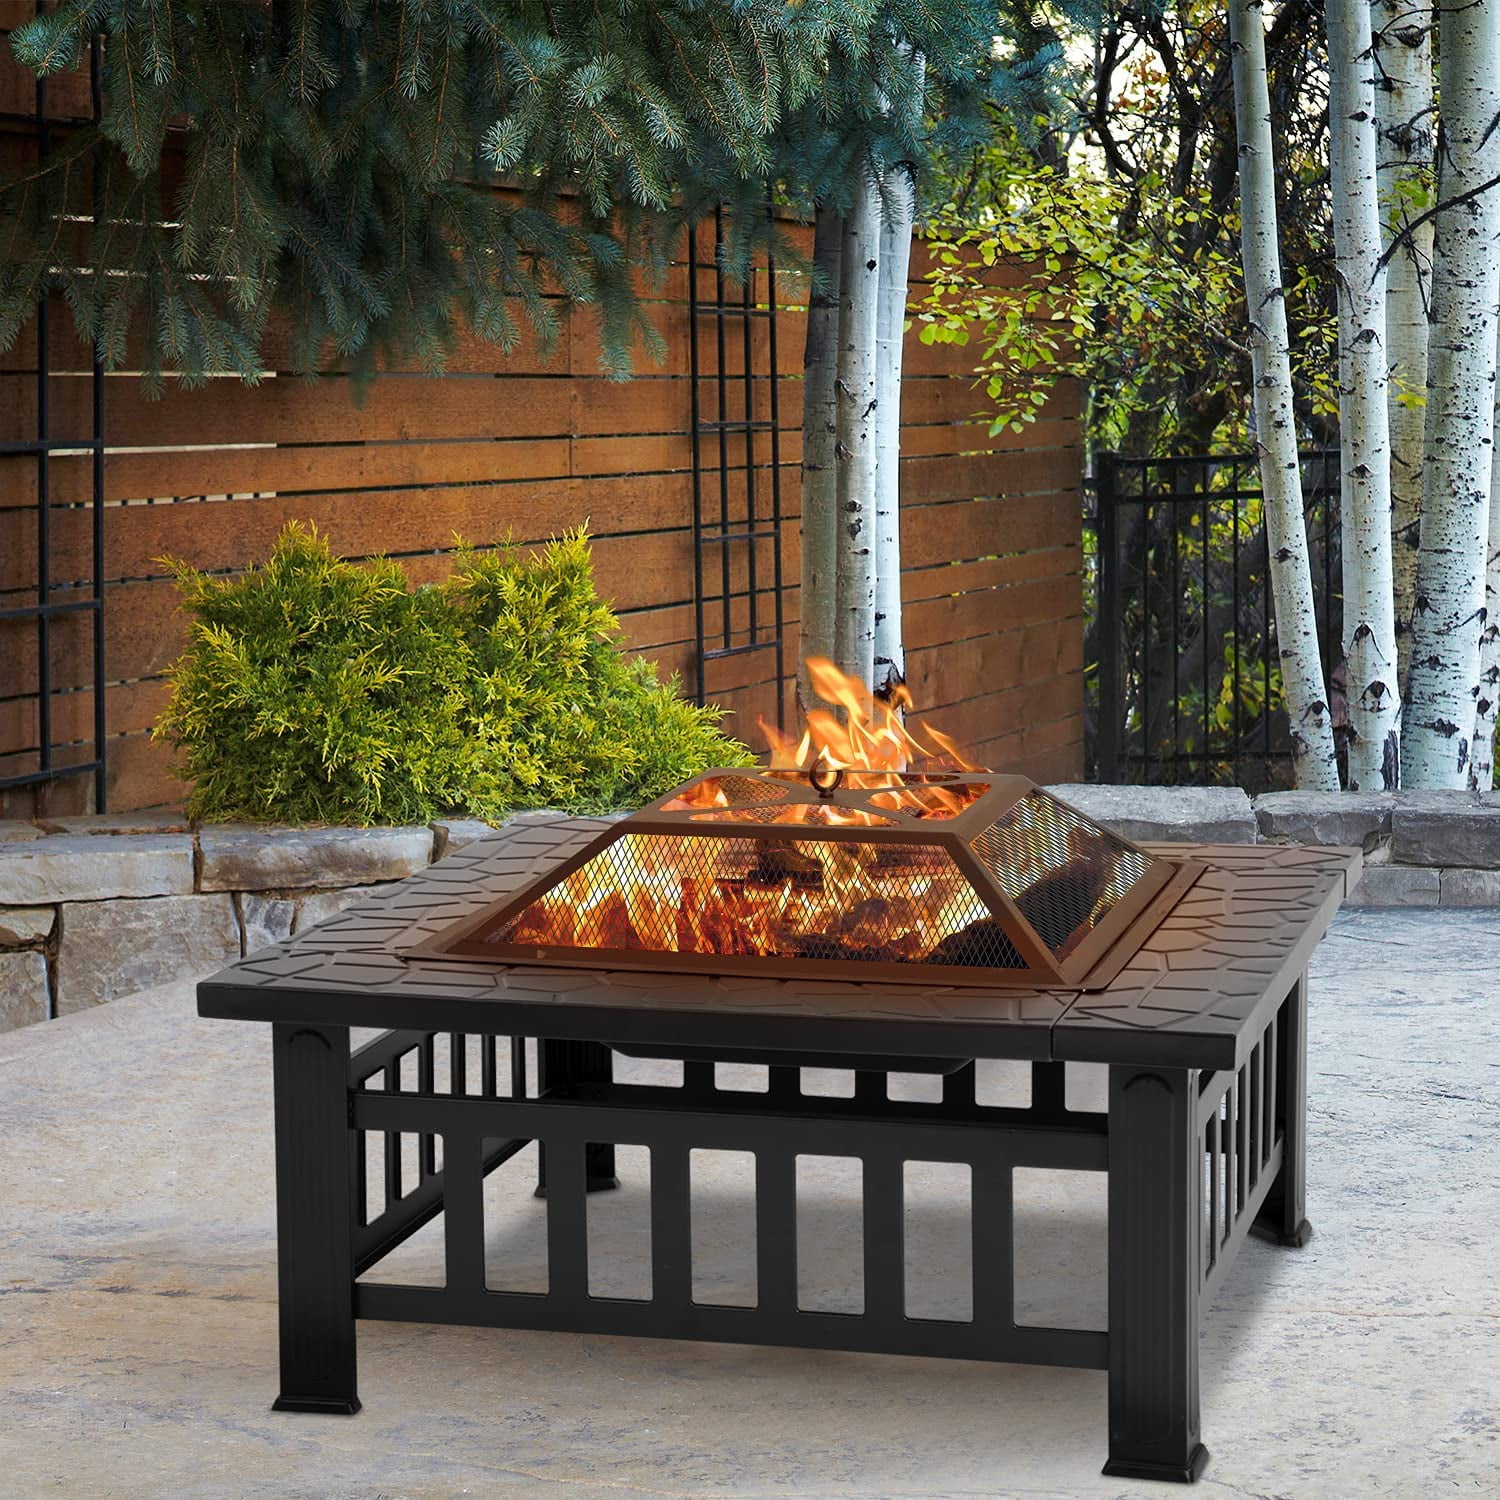 Large steel Charcoal Trolley Garden Barbecue BBQ Grill & Chimnea Wood Burner 